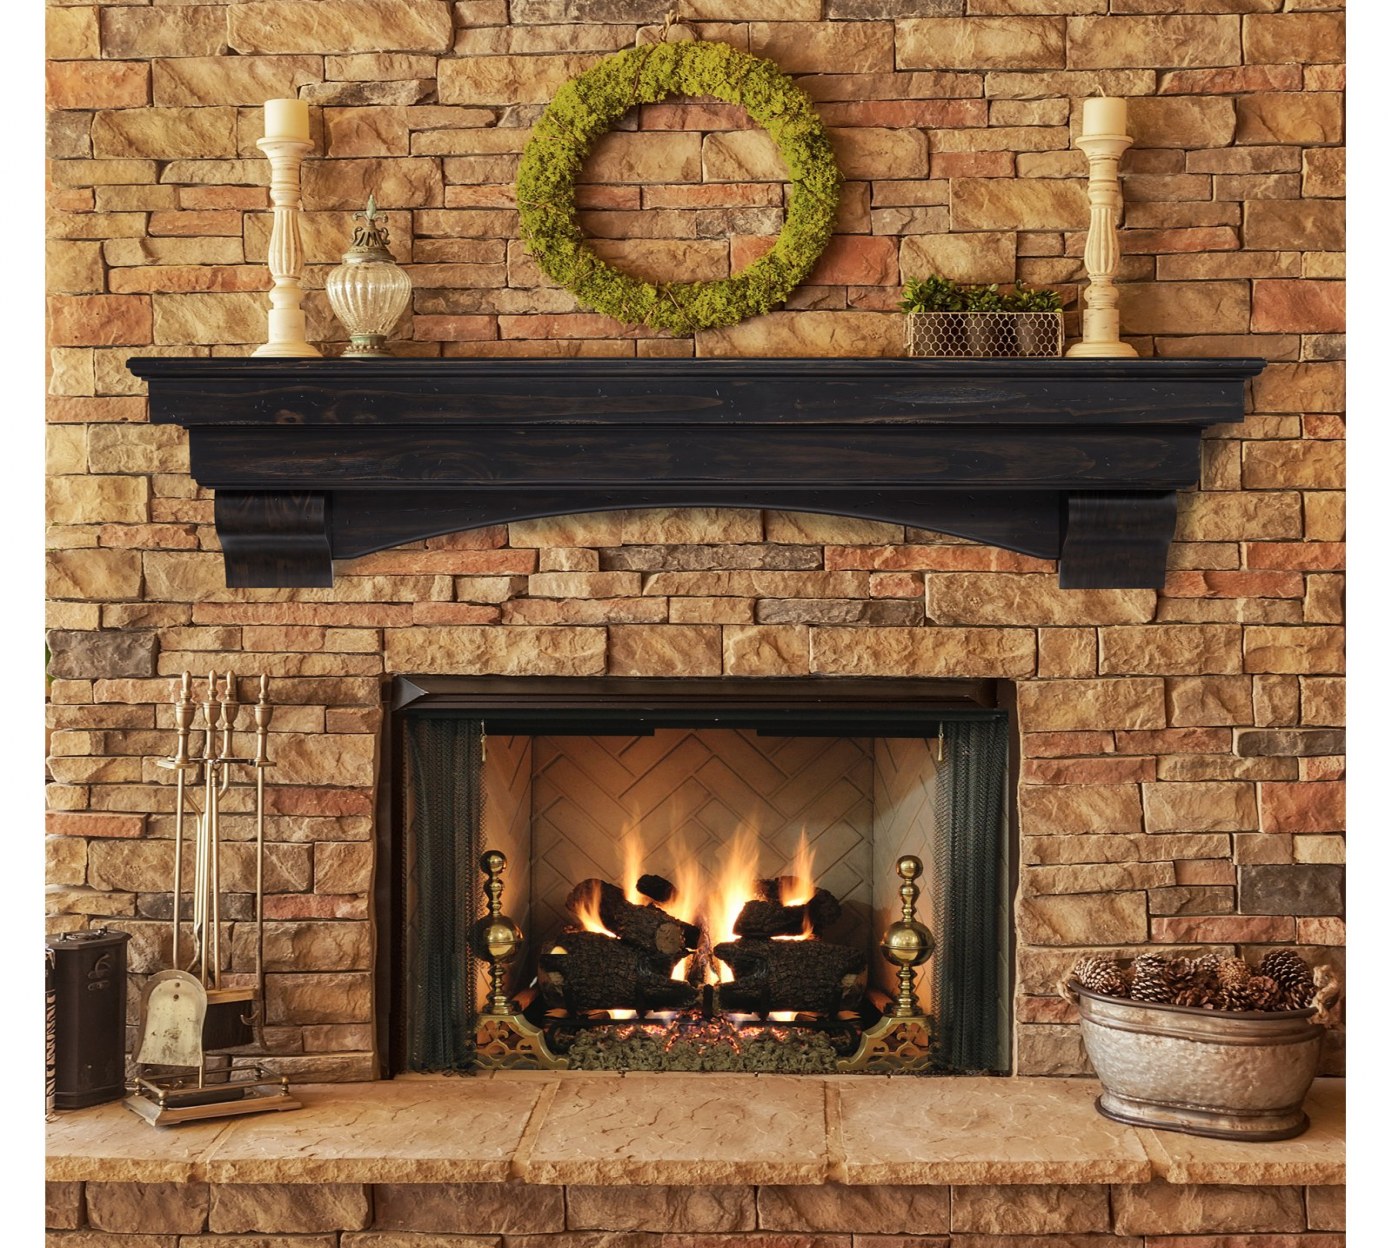 Fireplace Remodel Diy Best Of Fireplace Mantel Shelf Relatively Fireplace Surround with